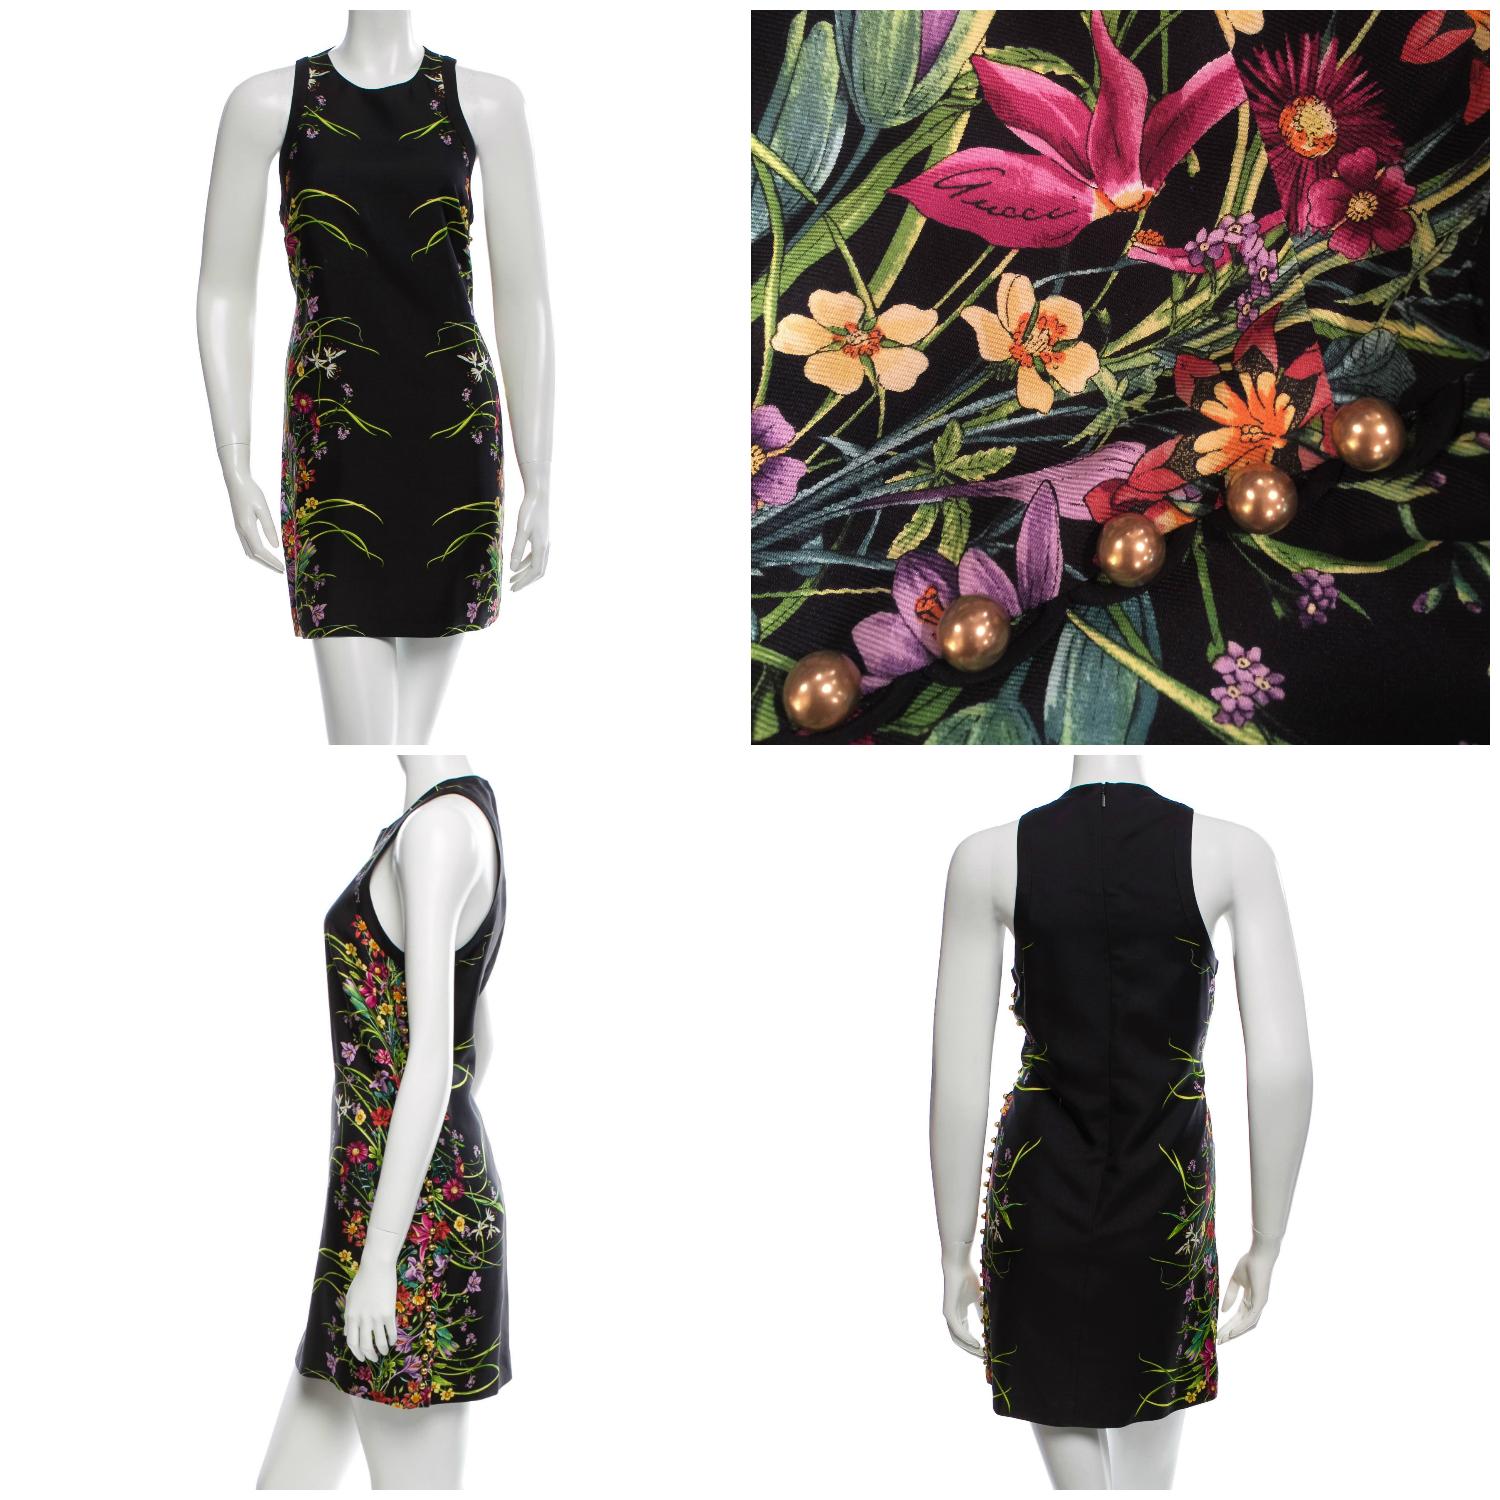 Gucci Flora Silk Dress
Brand New
S/S 2013
* Retail $1475
* Iconic Black Flora Fabric
* Euro Size: 40 Size: 4
* Classic Flora Design
Gucci Signature Throughout the Dress
*Zips Up the Back
* Fully Lined
* Button Accent Up One Side

Bust: 34